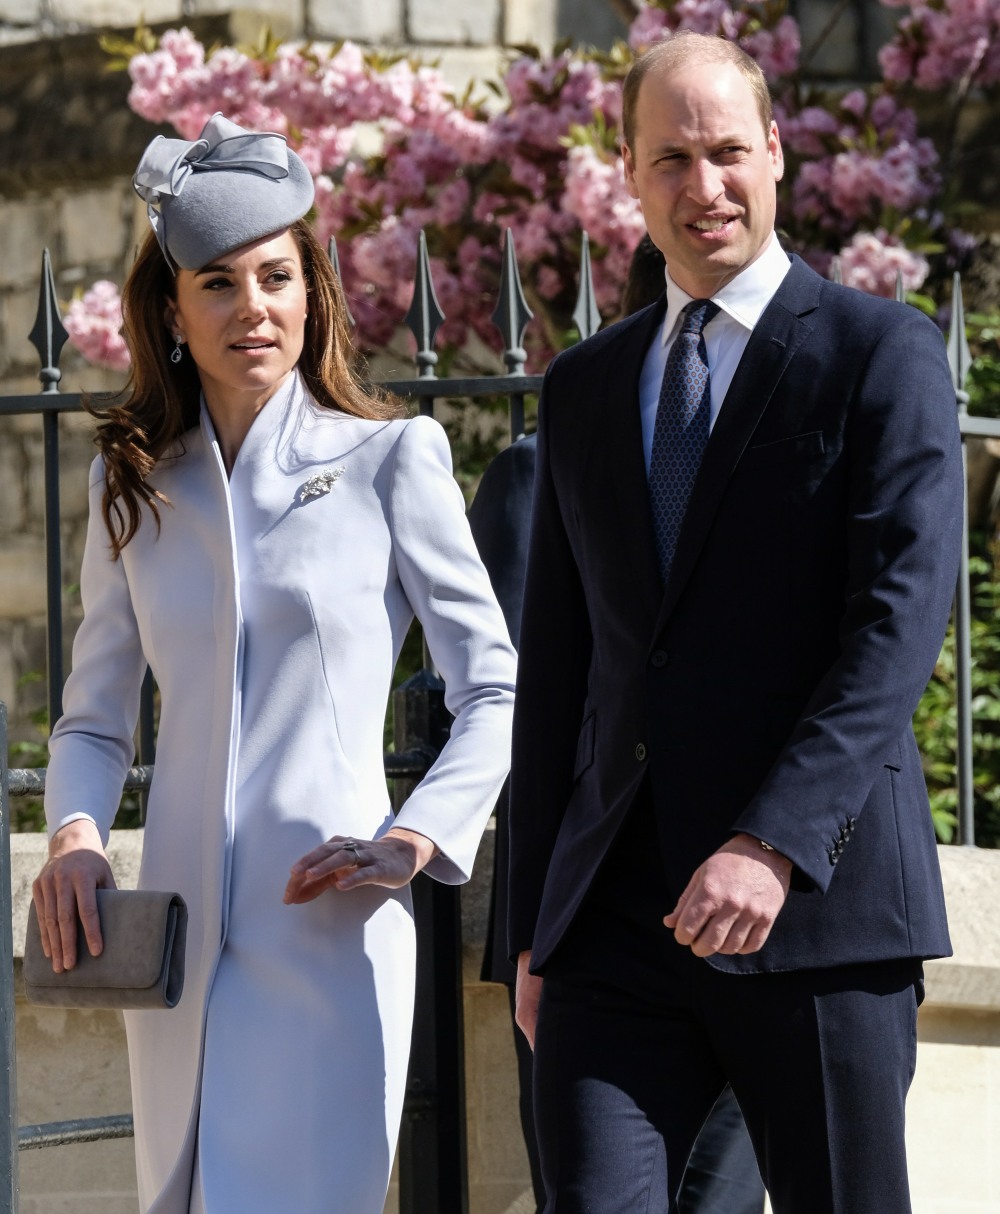 Kate, Duchess of Cambridge, Prince William, Duke of Cambridge arrives at the Easter Sunday church service at St.George's Chapel in Windsor Castle on Sunday April 21, 2019